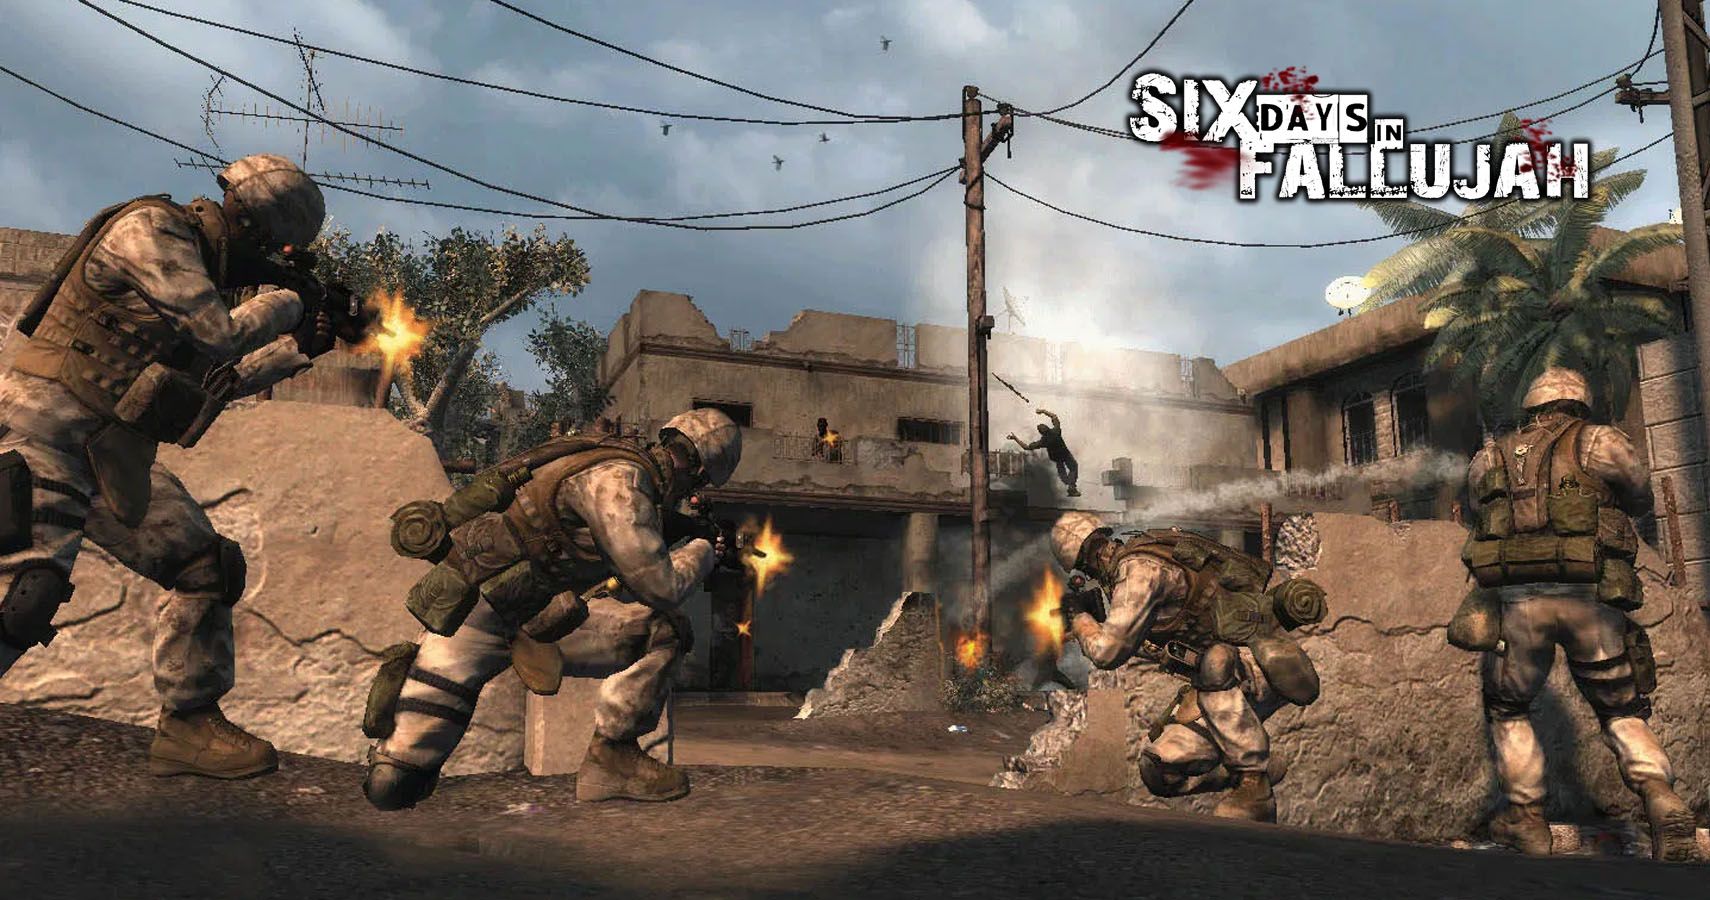 Six Days In Fallujah Creator Isnt Interested In Political Commentary